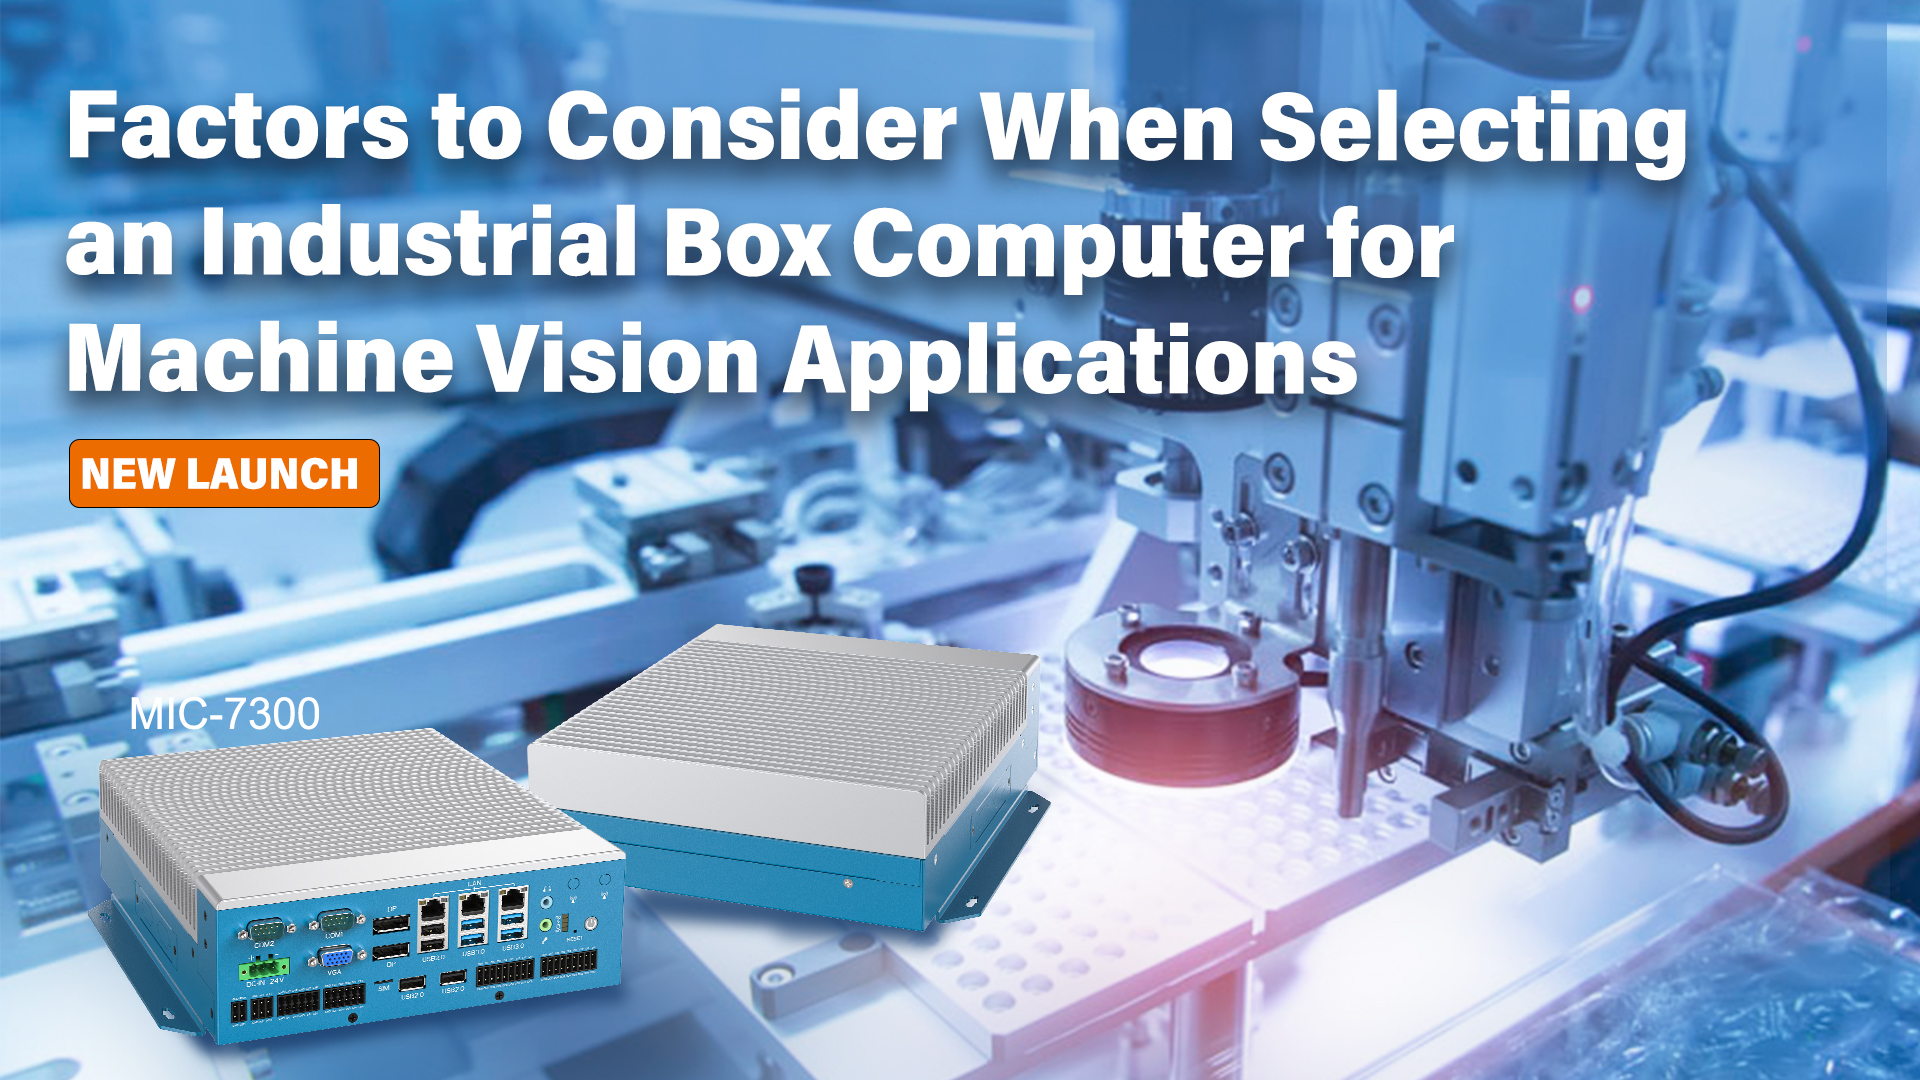 Factors to Consider When Seletcting an Industrial Box Computer for Machine Vision Applications